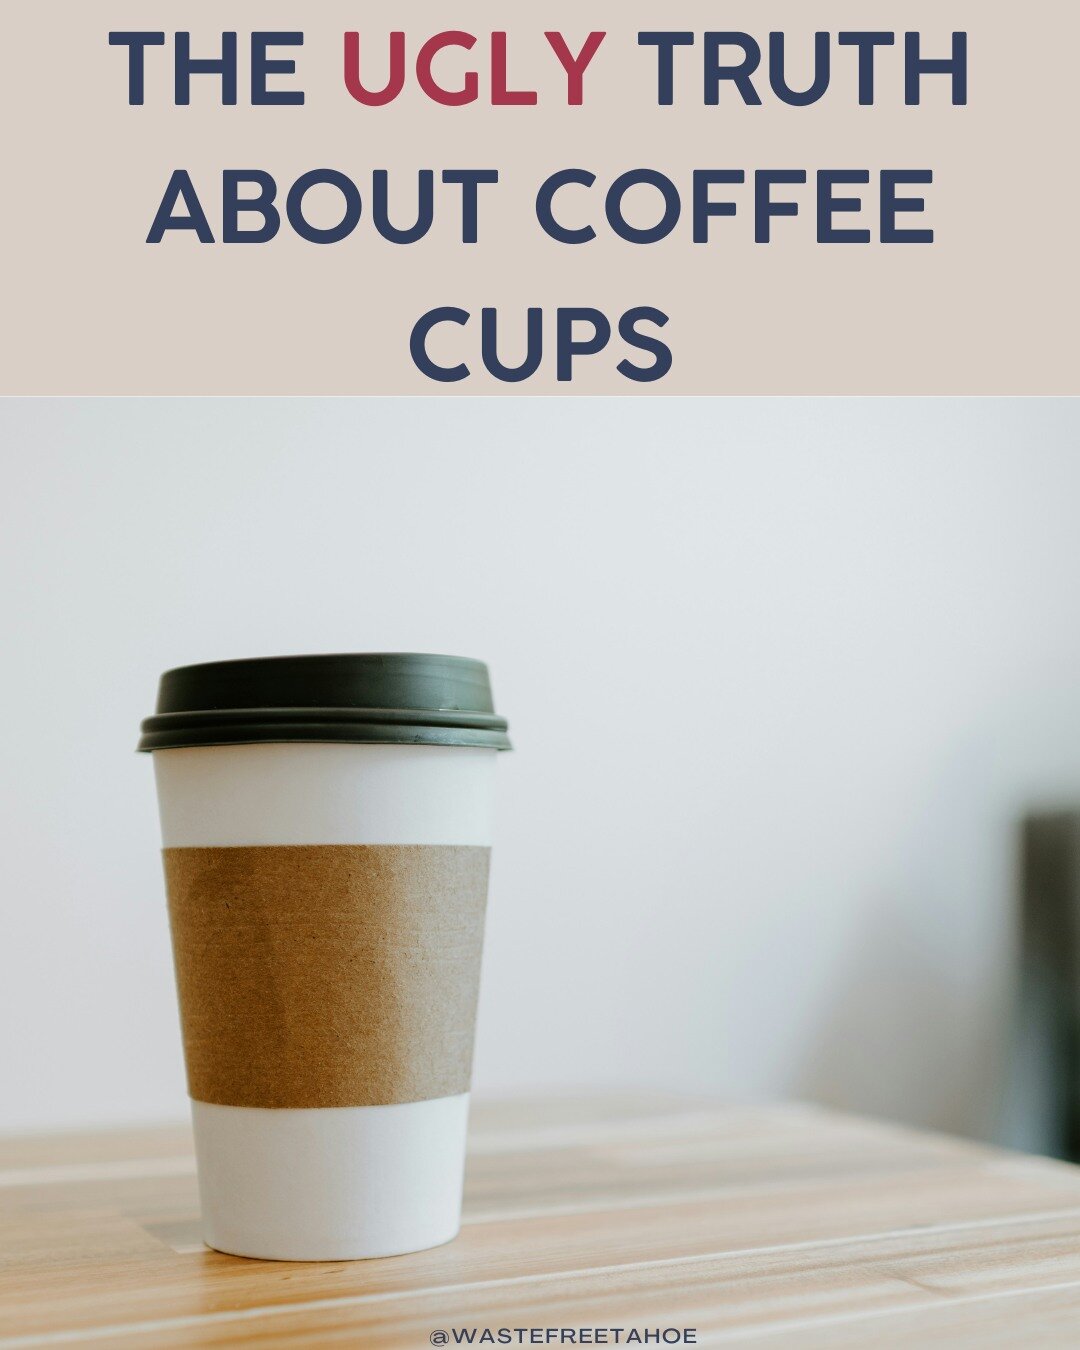 Did you know that billions of coffee cups end up in landfills each year? ☕ Let's brew change together and choose reusable cups! 🌱 

#wastefree #wastefreecoffee #wastefreetahoe #sustainability #WasteLessTip